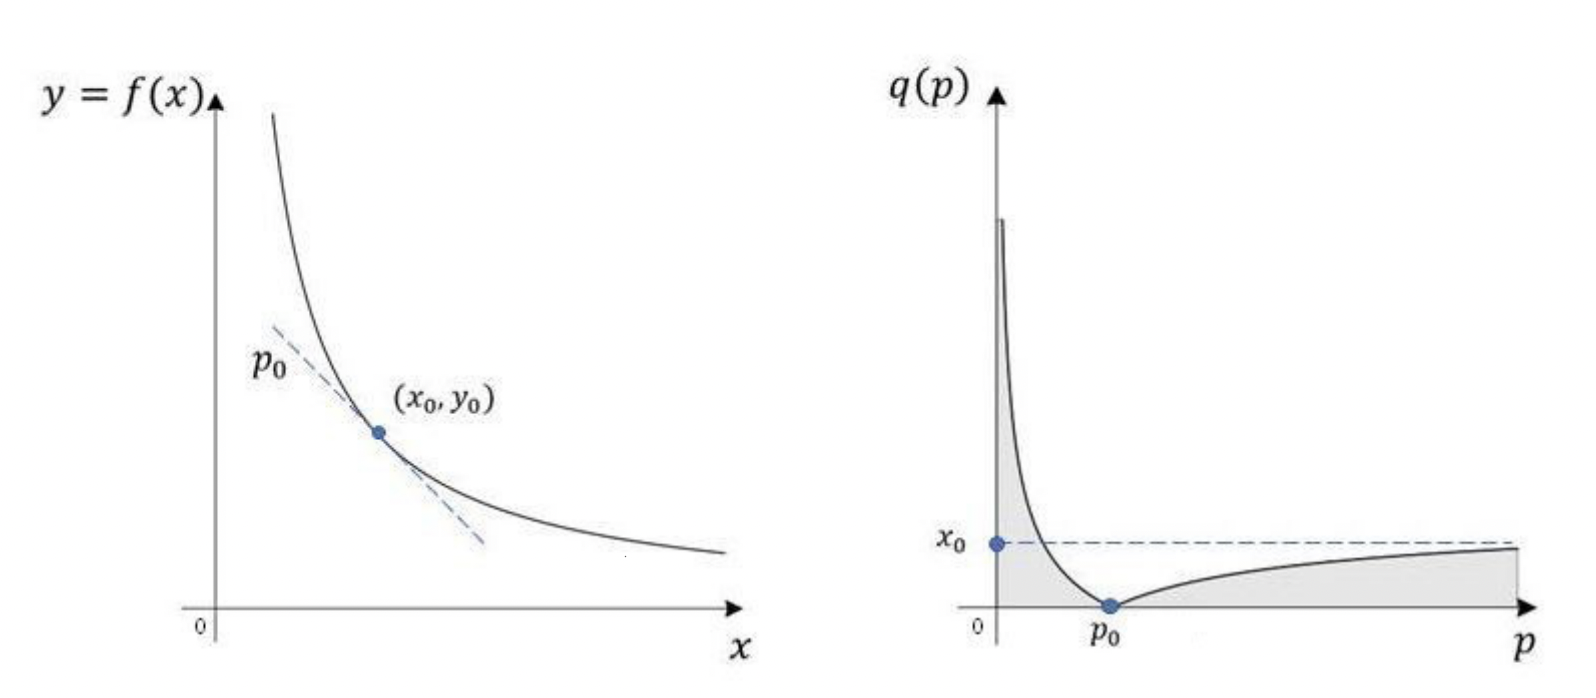 Constant product pricing curve (left) vs. equivalent order book (right). Source: J. Young, Oct. 2020, On Equivalence of Automated Market Maker and Limit Order Book Systems